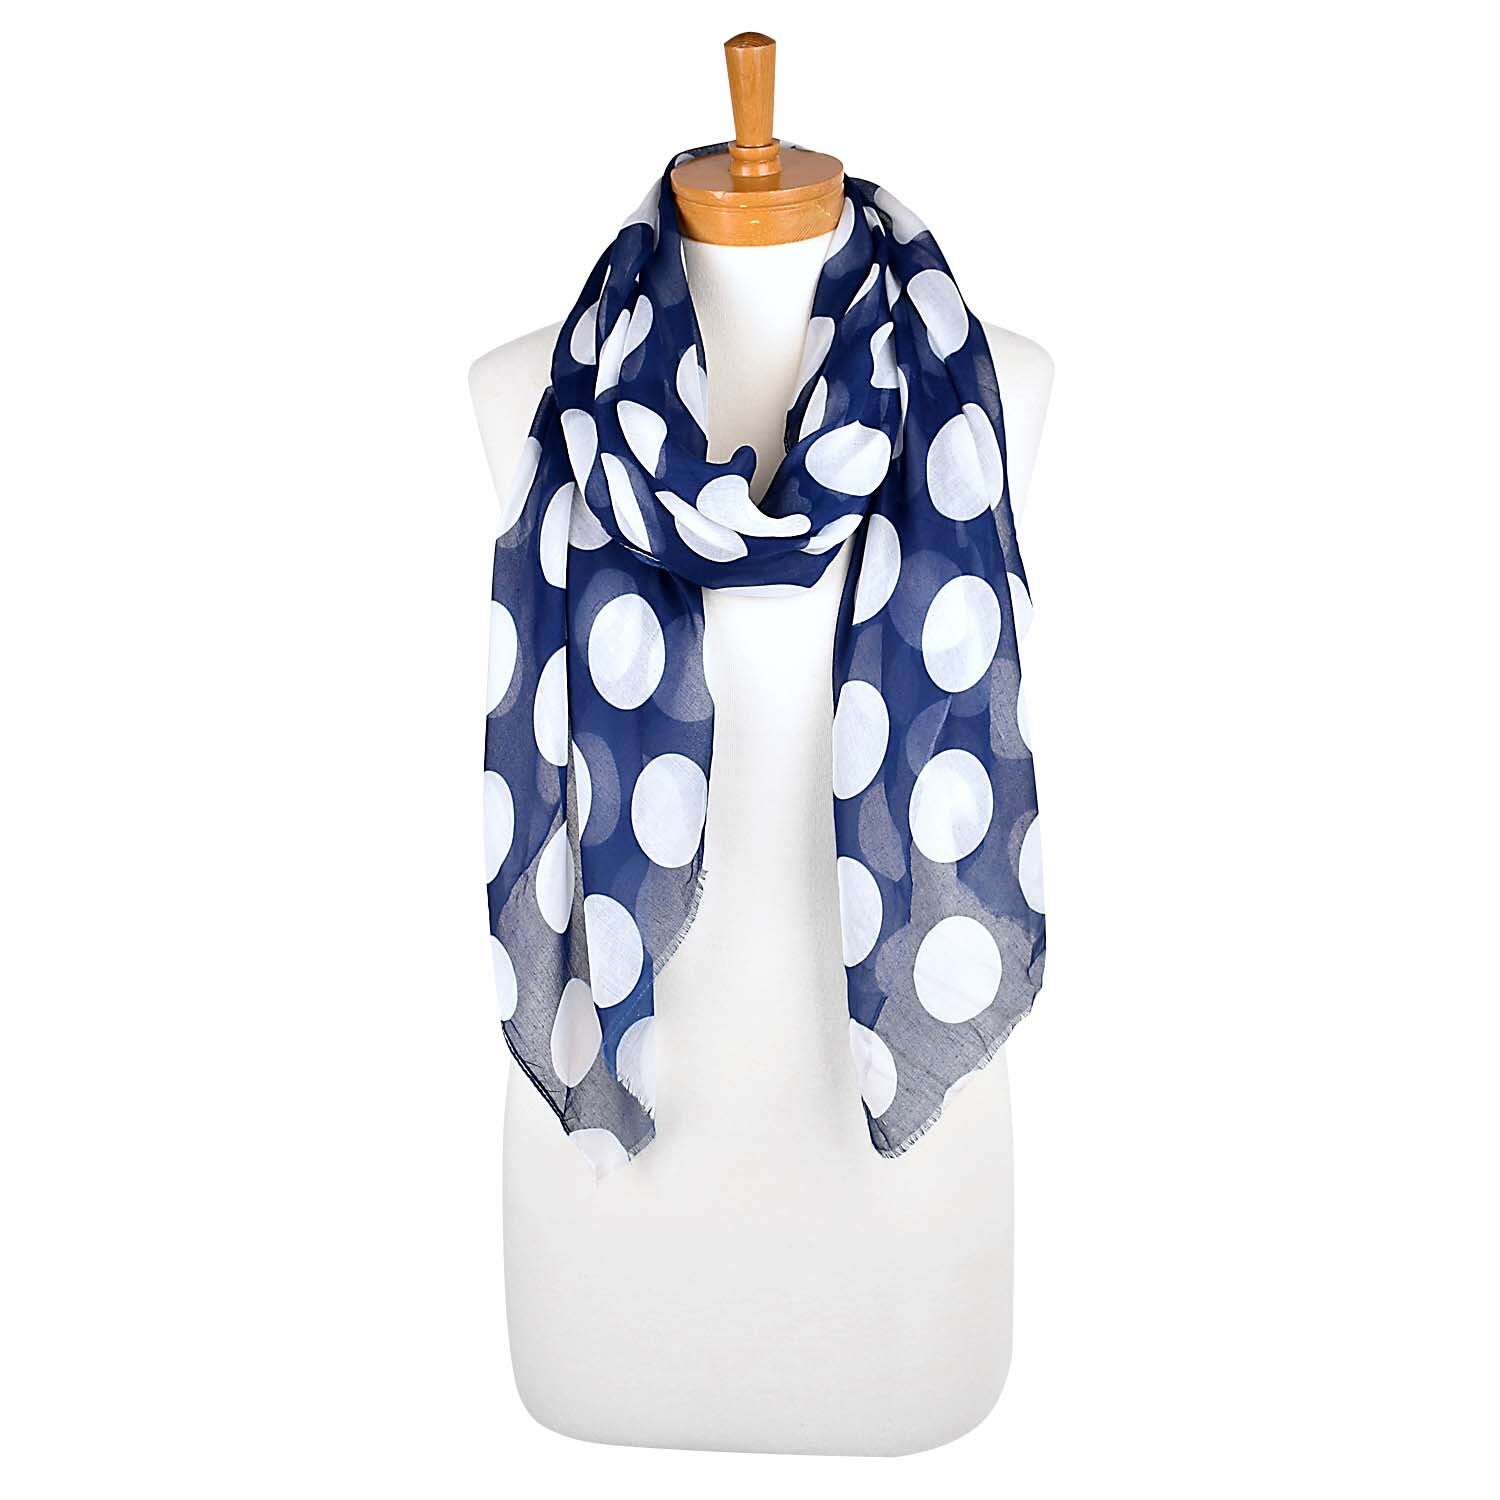 Mill & Hide - Taylor Hill Scarves & Co - Navy Polka Dot Scarf